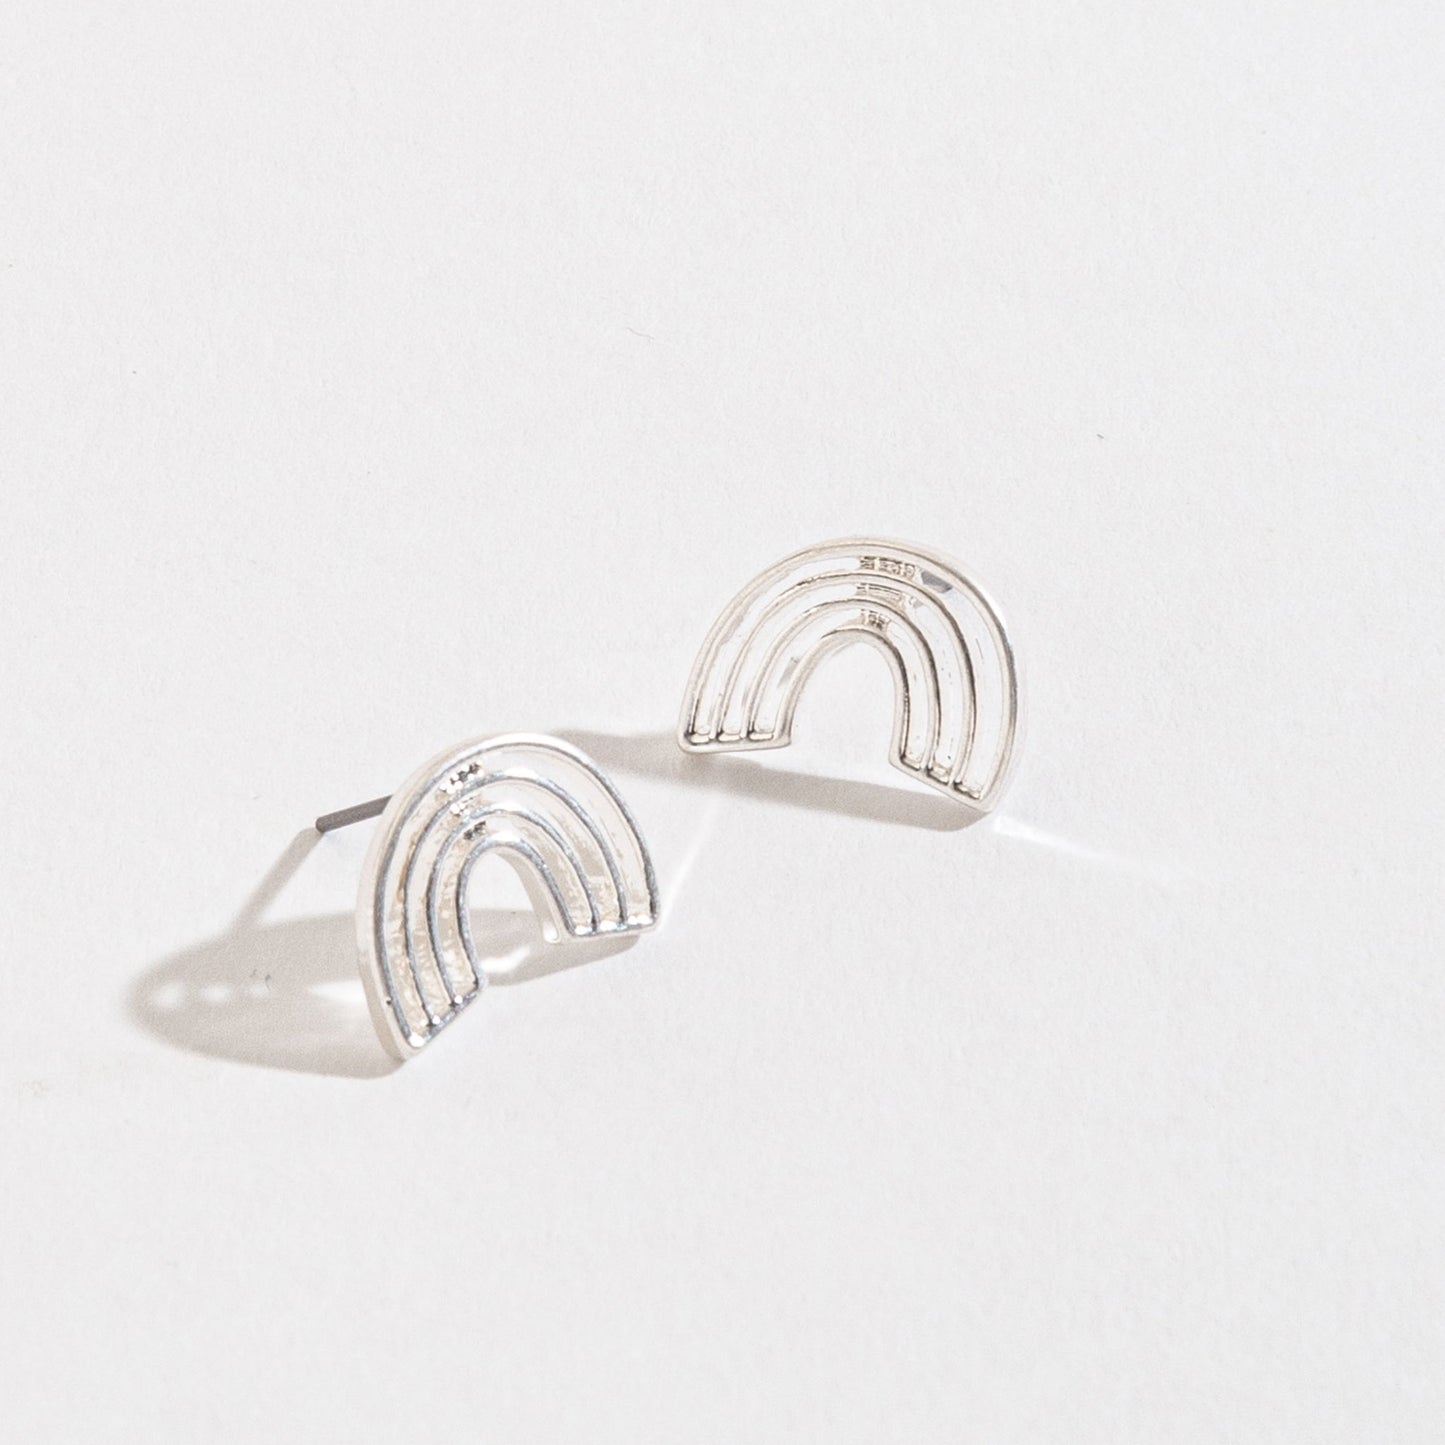 silver rainbow stud earrings on a white background